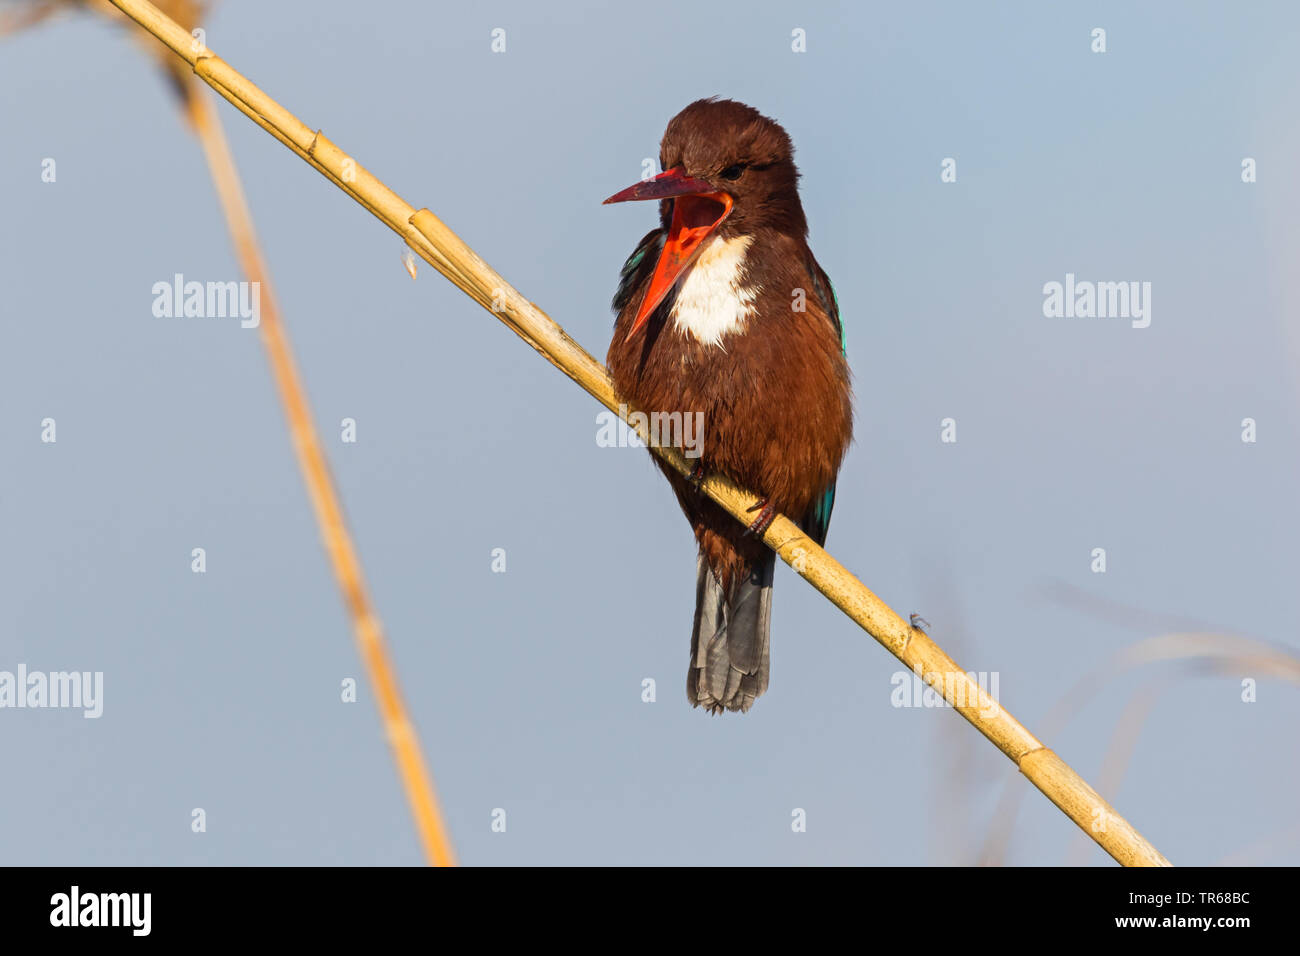 white-throated kingfisher, White-breasted Kingfisher, River Kingfisher (Halcyon smyrnensis), sitting on reed calling, Israel Stock Photo